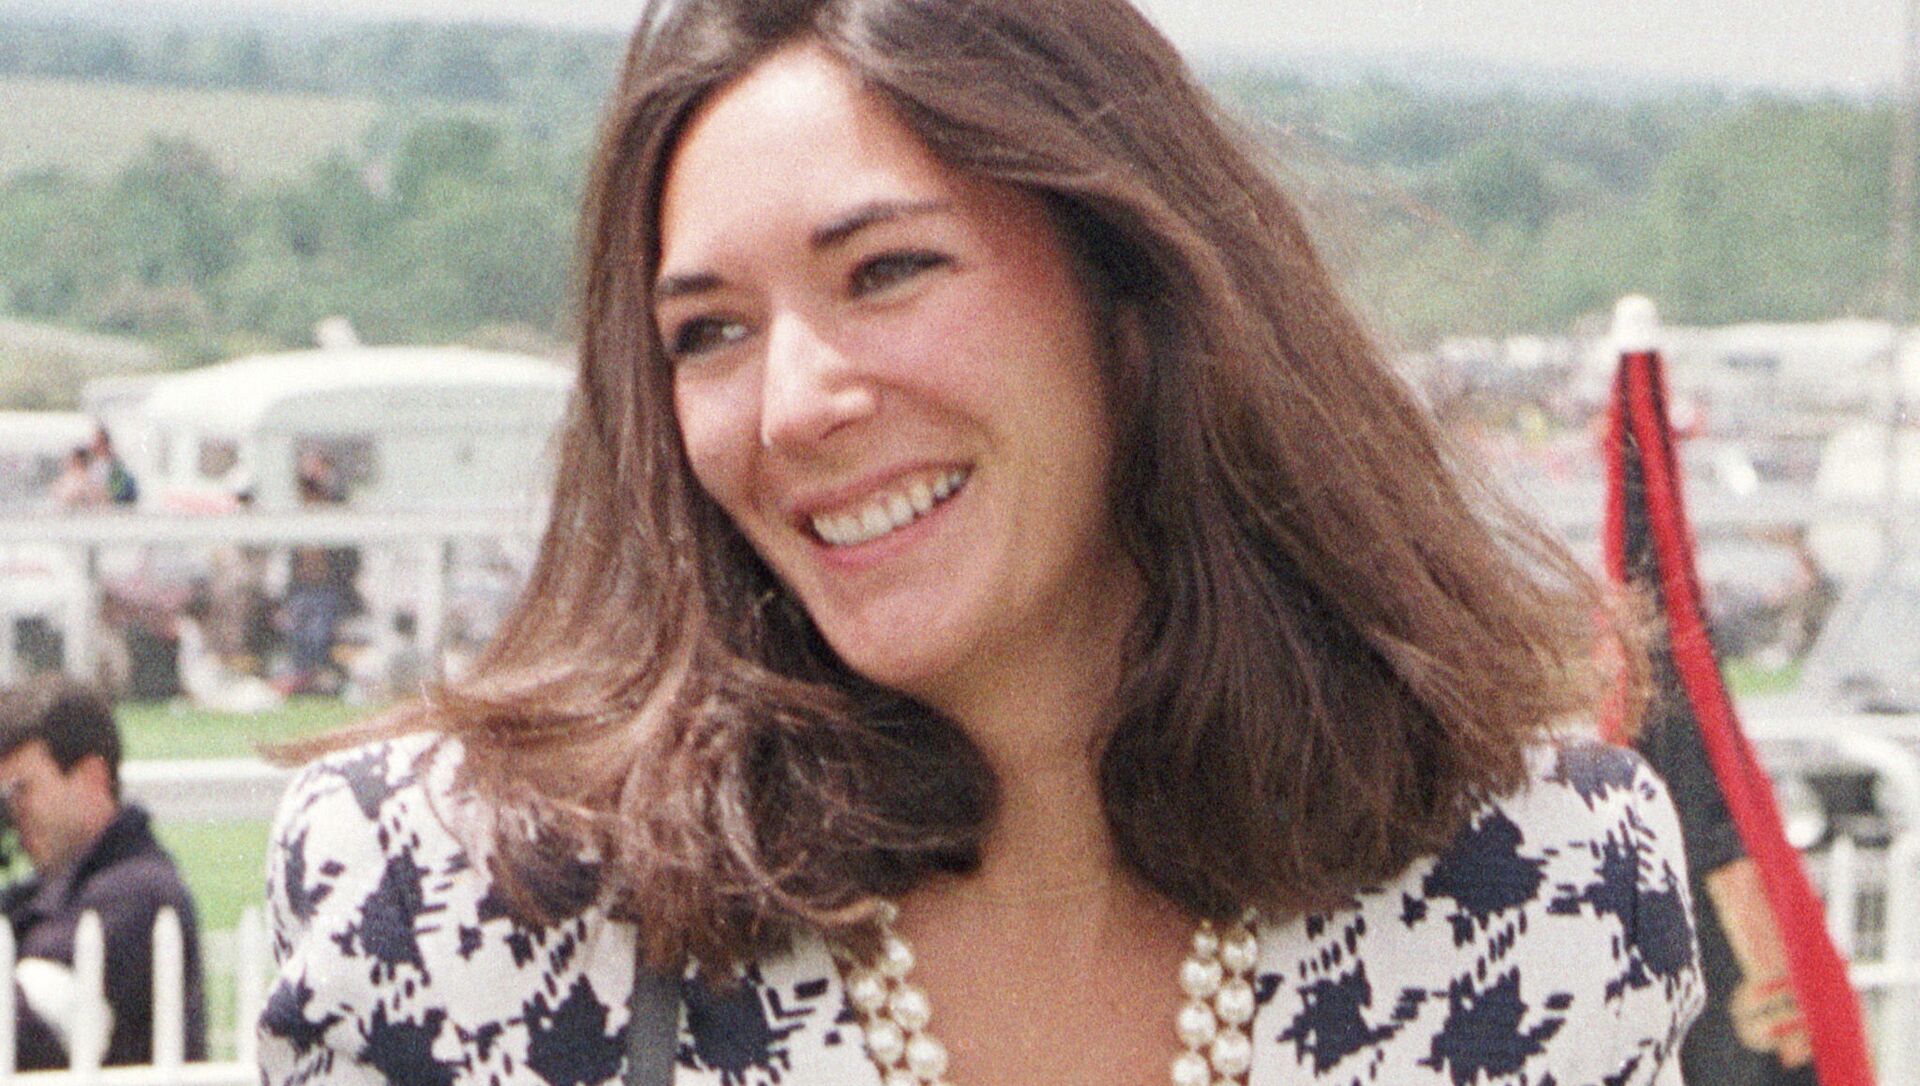 In this 5 June 1991 file photo, British socialite Ghislaine Maxwell arrives at Epsom Racecourse in Surrey. The FBI said Thursday 2 July 2020 that Ghislaine Maxwell, who was accused by many women of helping procure underage sex partners for Jeffrey Epstein, has been arrested in New Hampshire. - Sputnik International, 1920, 05.02.2021